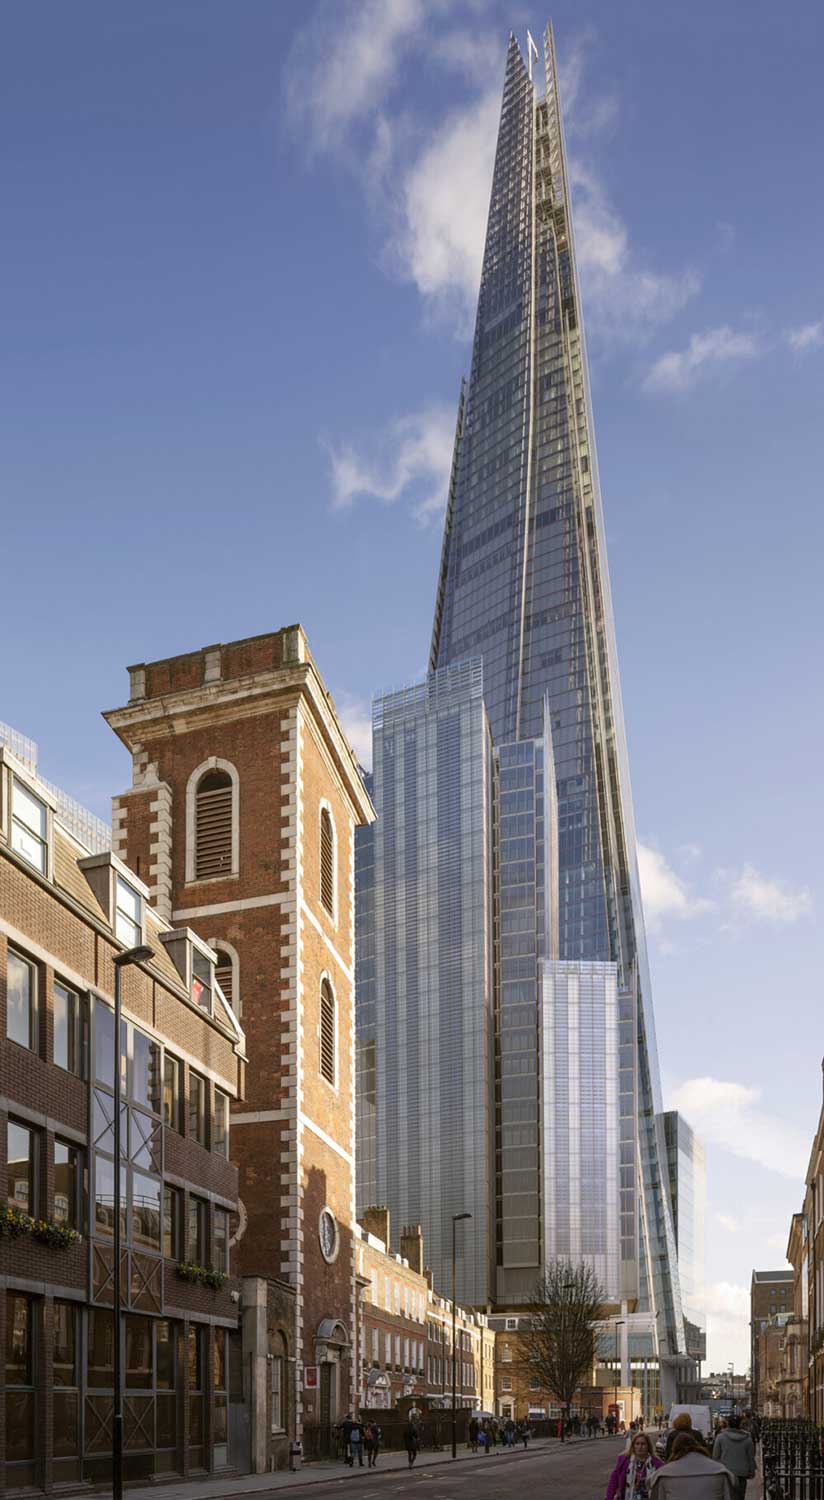 The Shard, London (© RPBW, rendering by Millerhare)